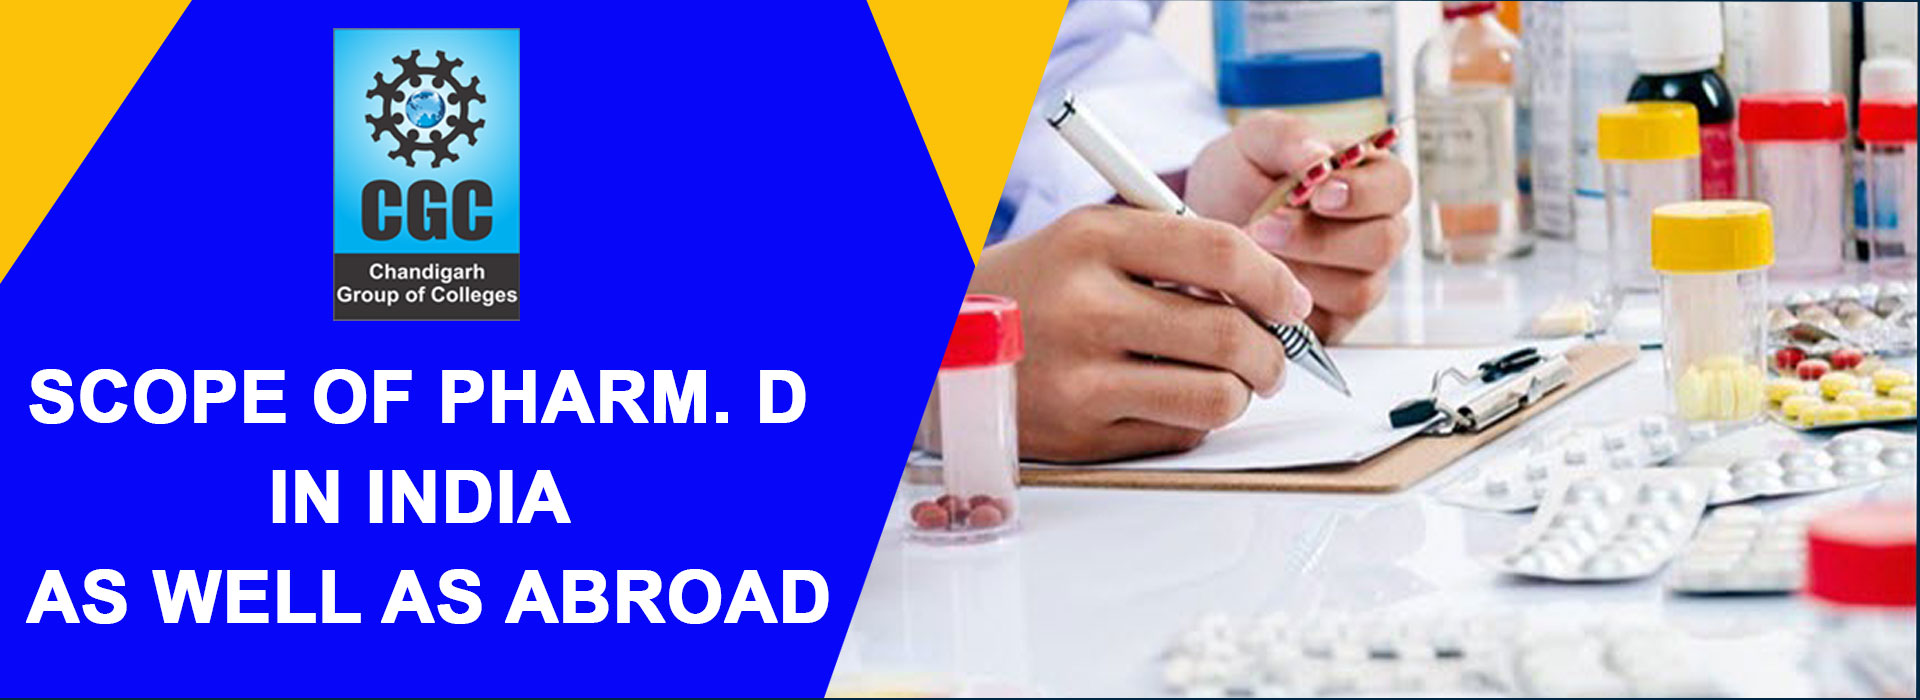 Scope Of Pharm. D In India and abroad 